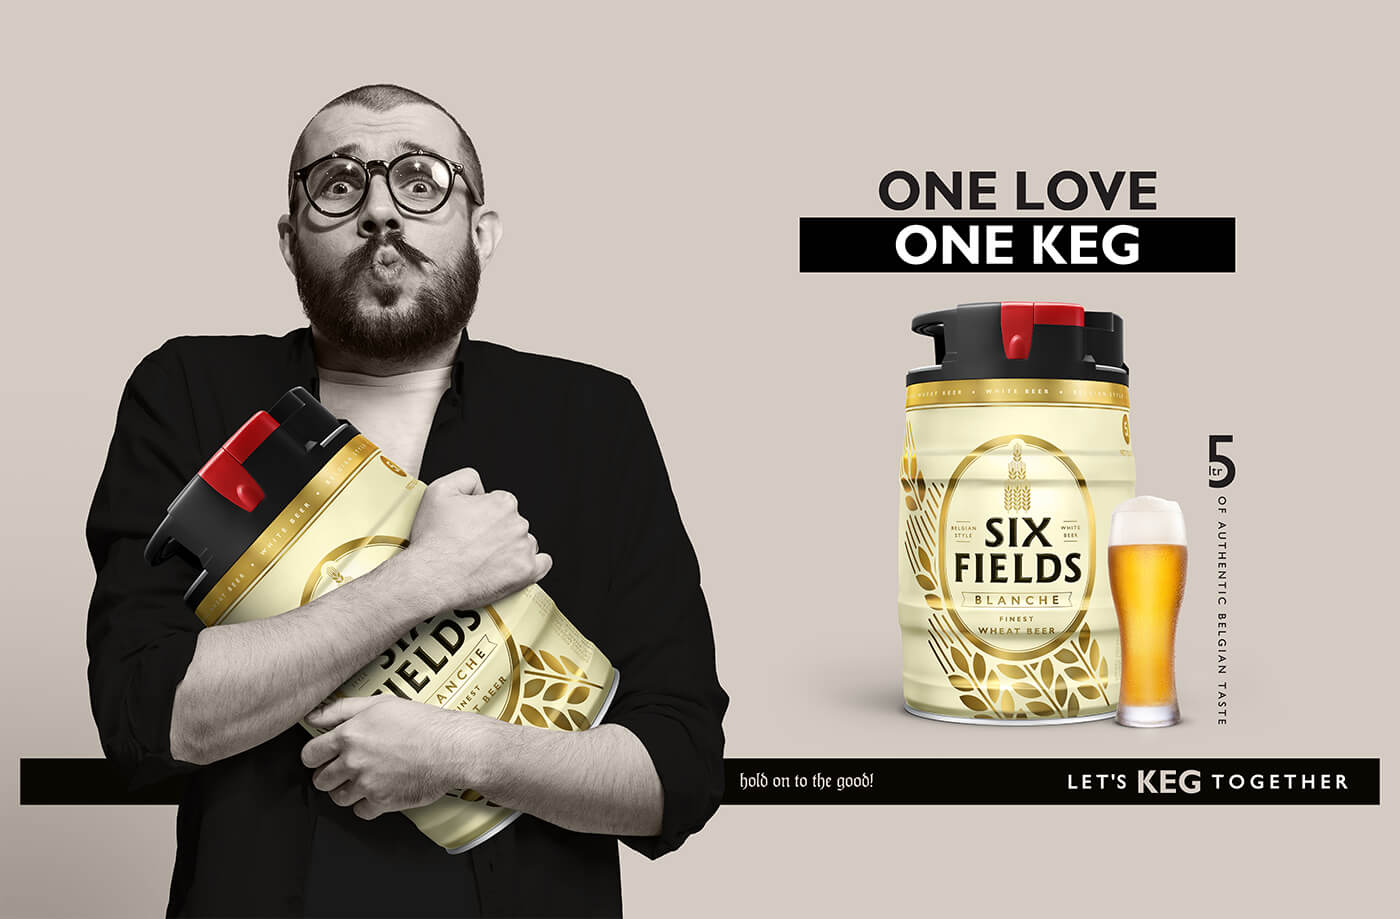 One Love One Keg- Campaign for a famous liquor brand Six Fields Blanche